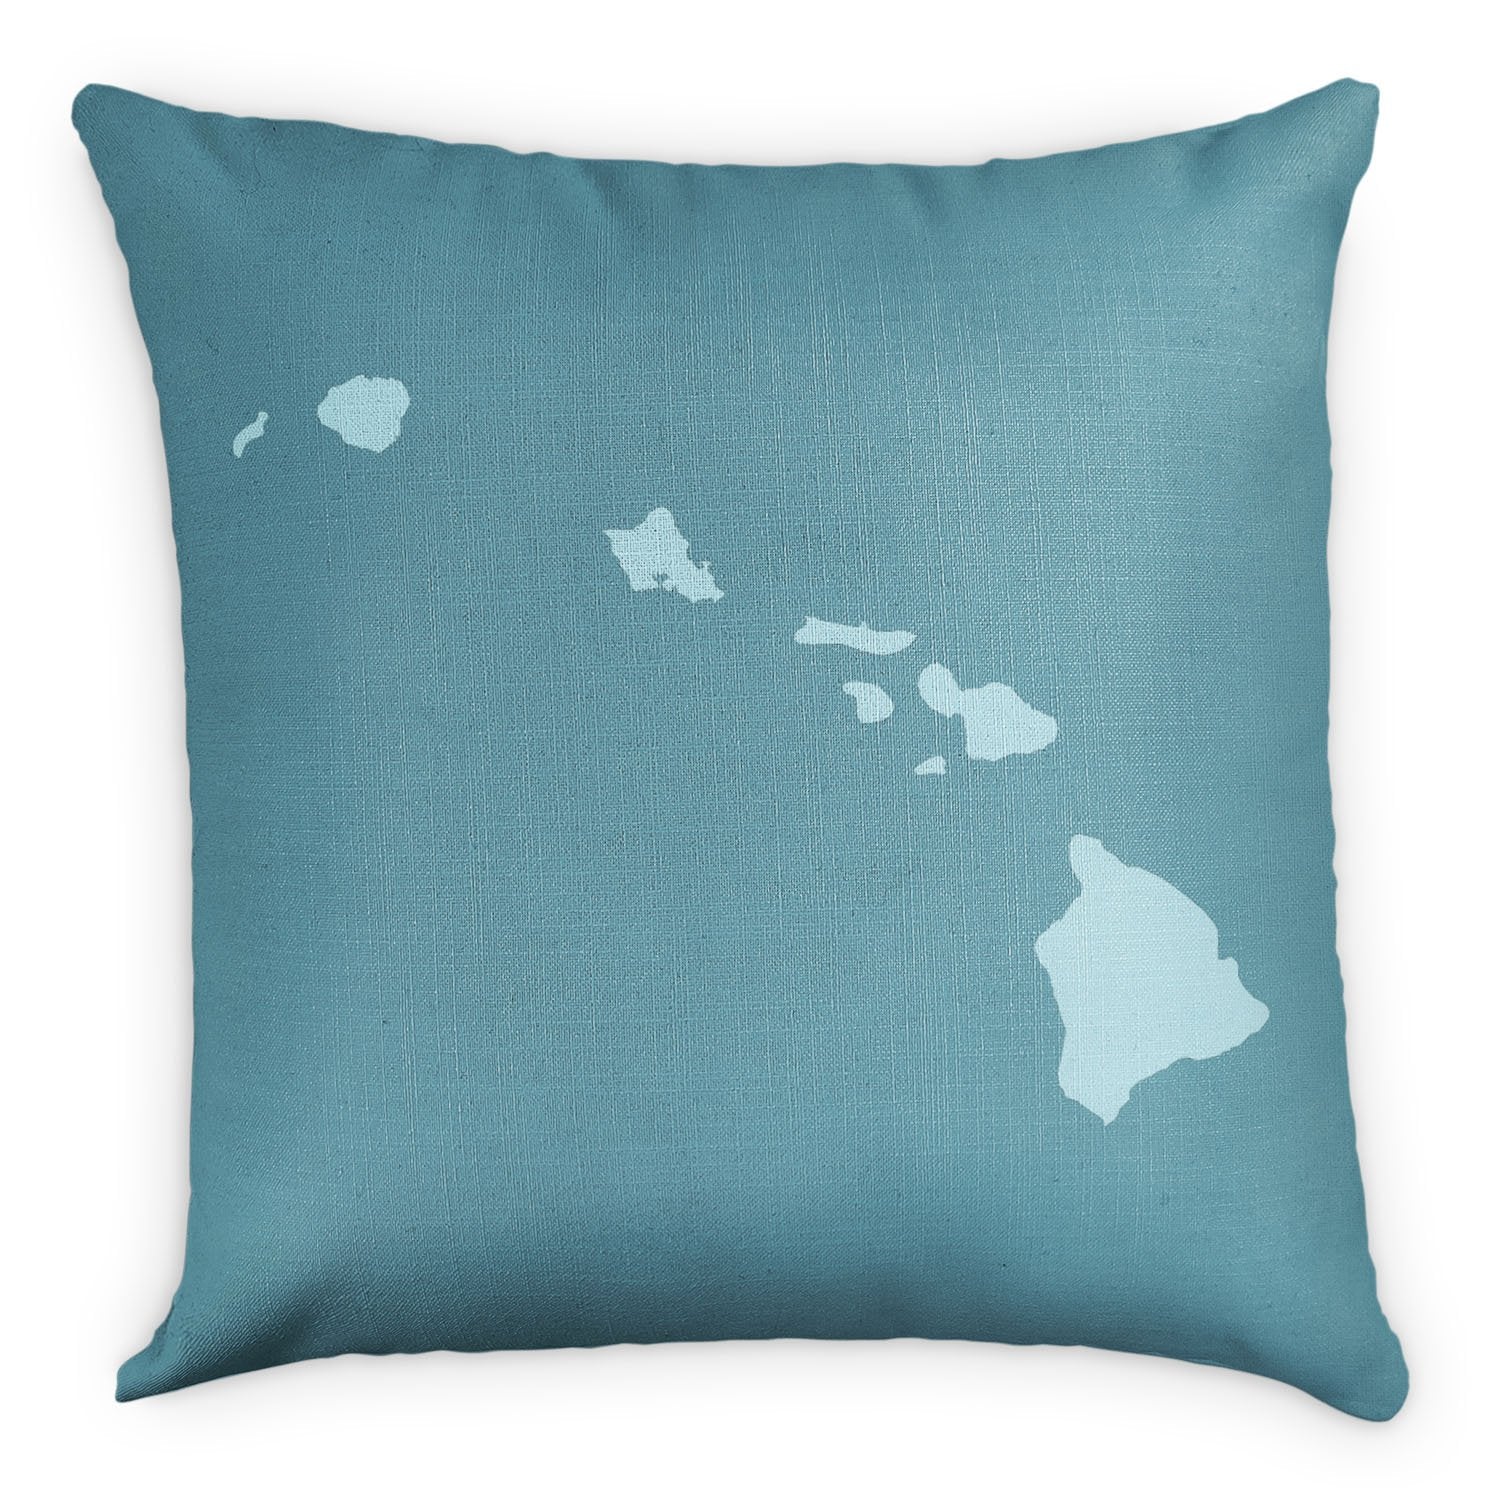 Hawaii Square Pillow - Linen -  - Knotty Tie Co.